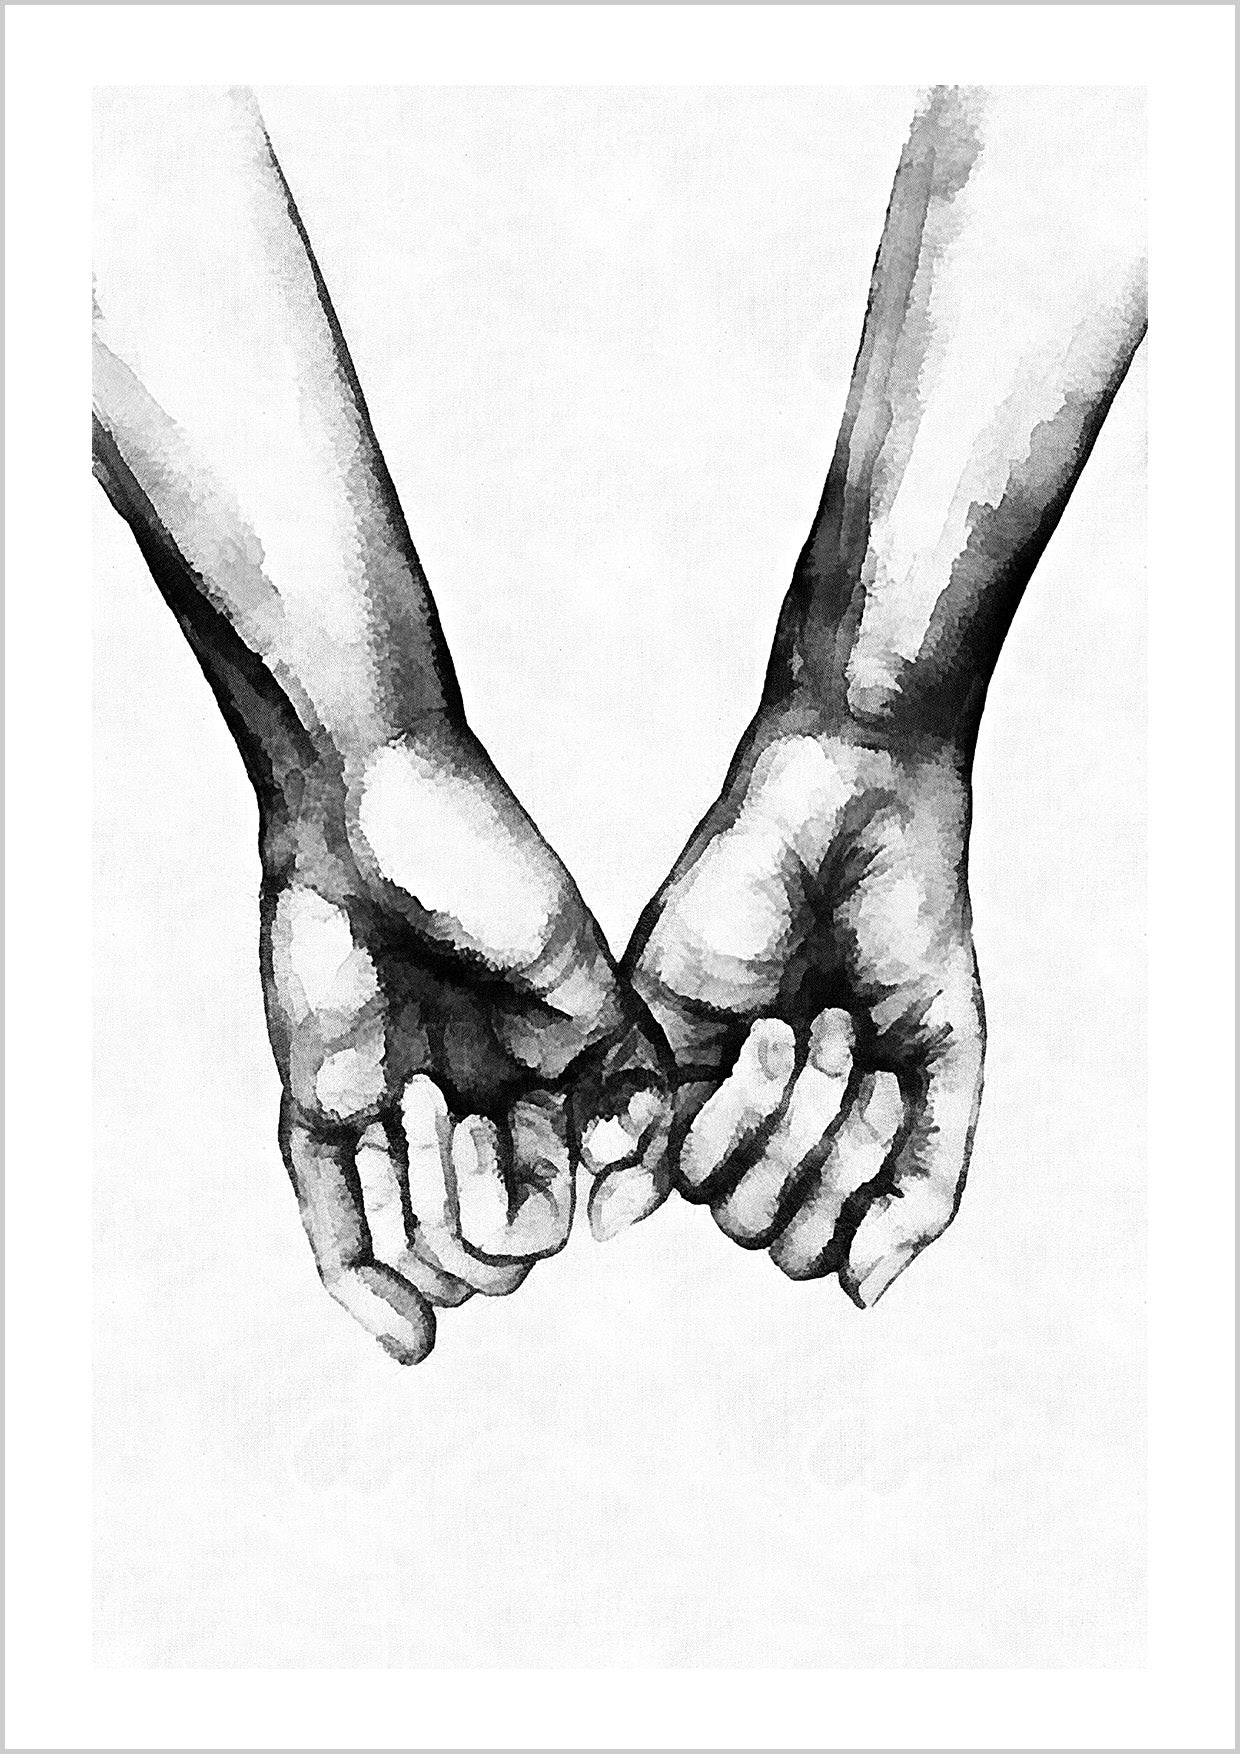 Illustration poster of two piny fingers holding each other. White textured background.